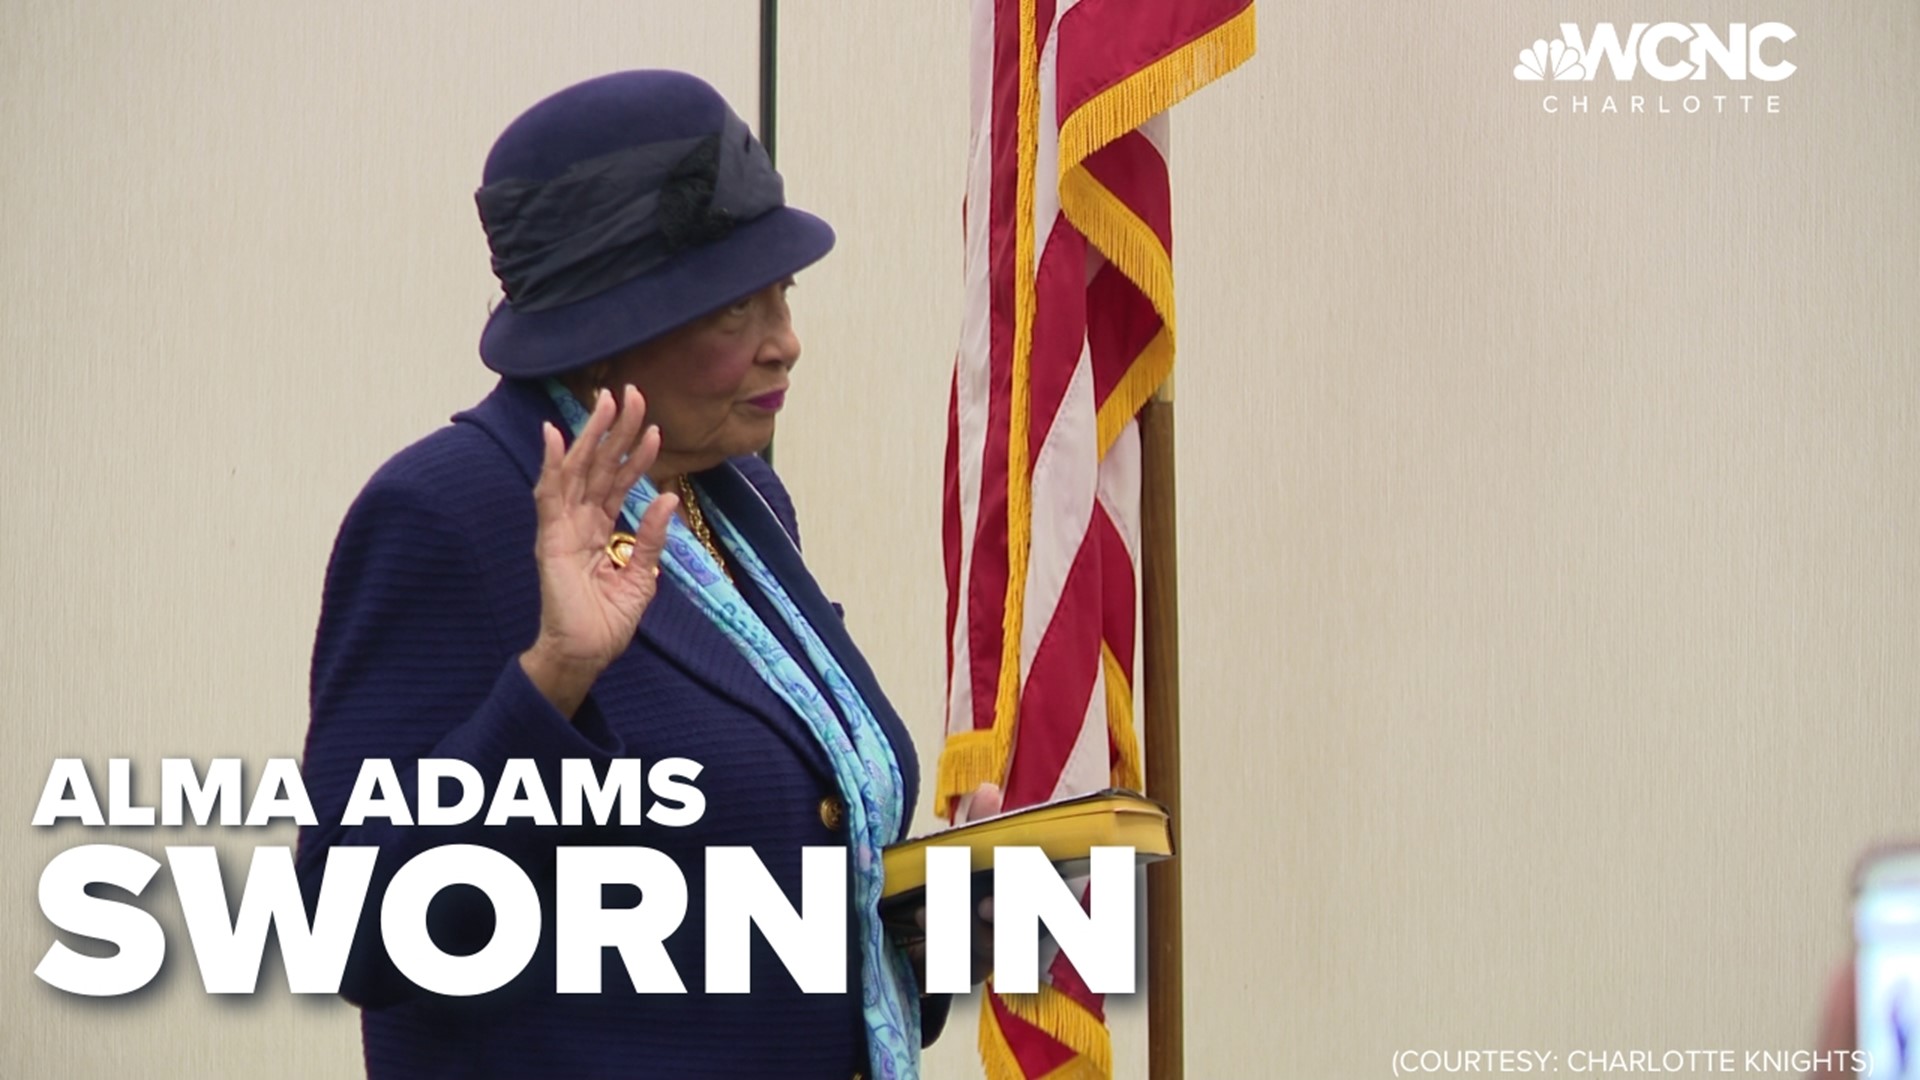 Congresswoman Alma Adams was in the Charlotte area for local swearing-in events.